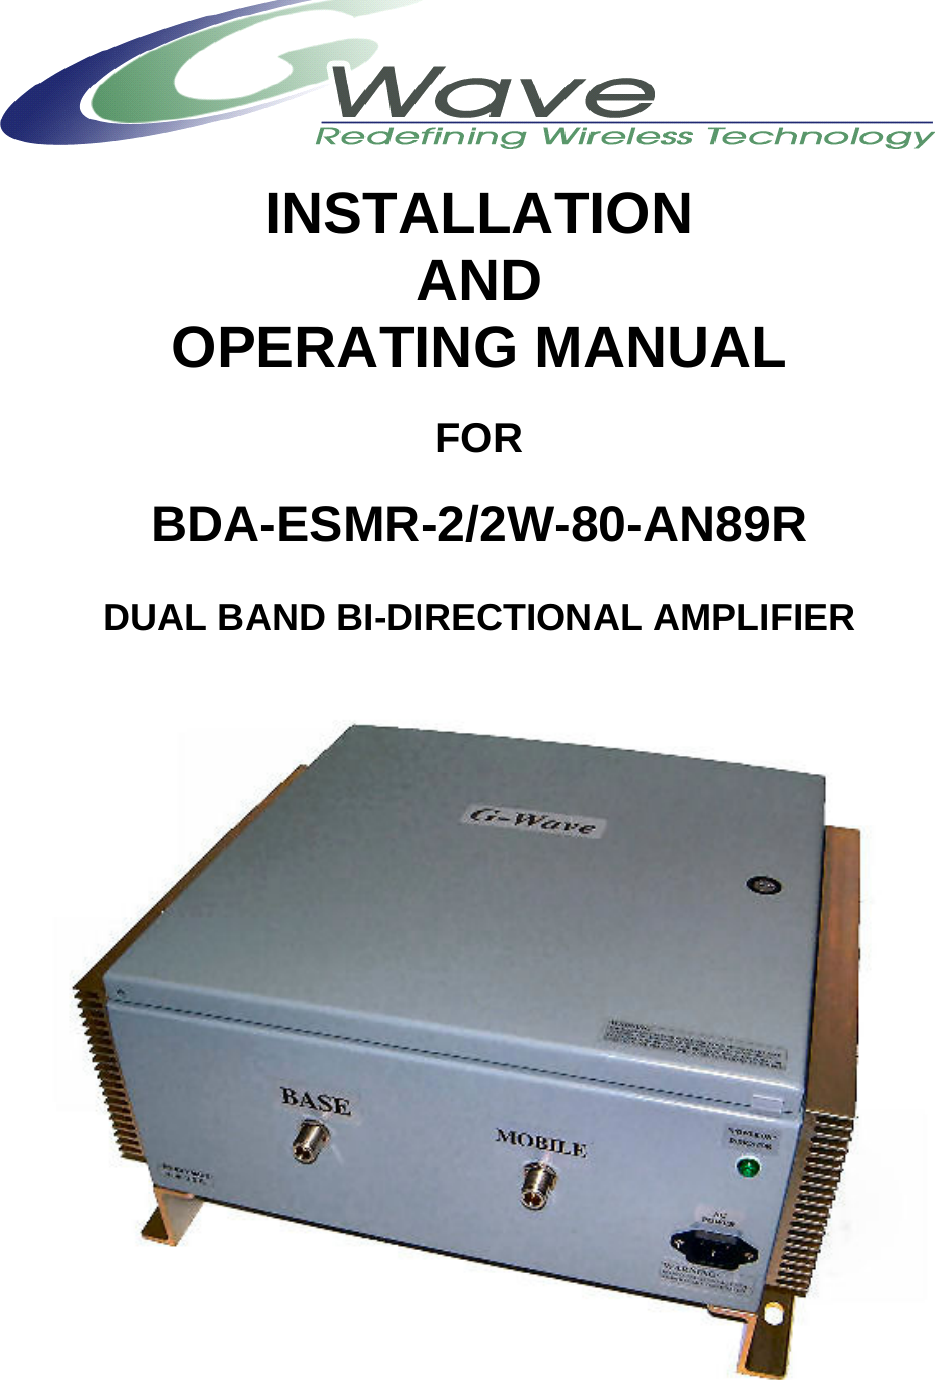   INSTALLATION AND OPERATING MANUAL  FOR  BDA-ESMR-2/2W-80-AN89R  DUAL BAND BI-DIRECTIONAL AMPLIFIER     